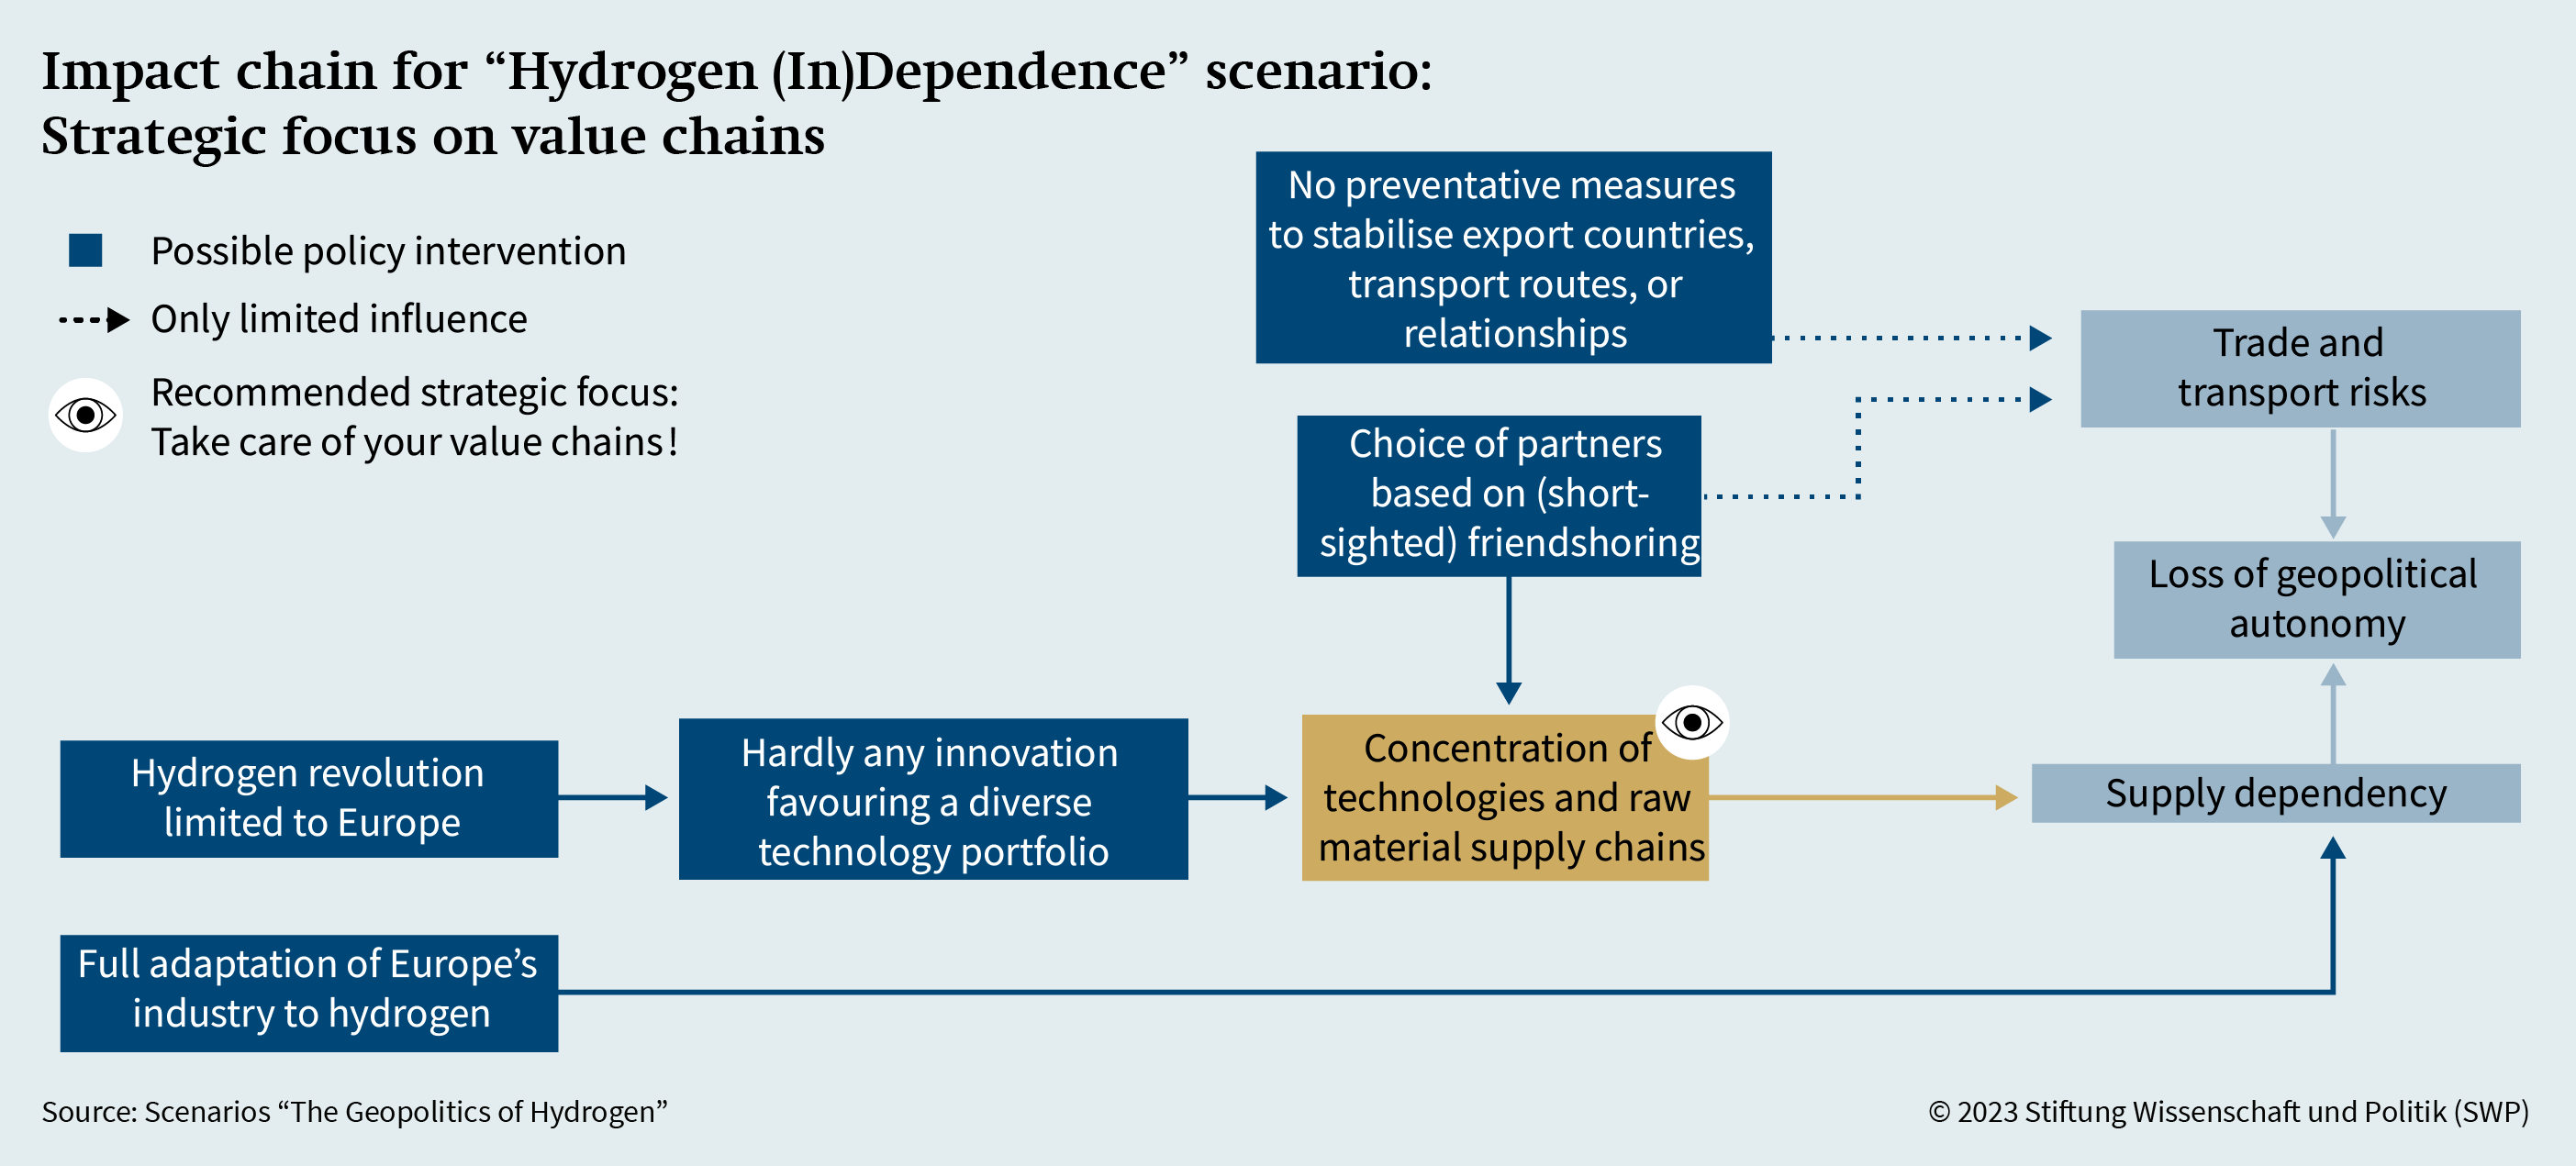 Figure 6: Impact chain for "Hydrogen (In)Dependence" scenario: Strategic focus on value chains